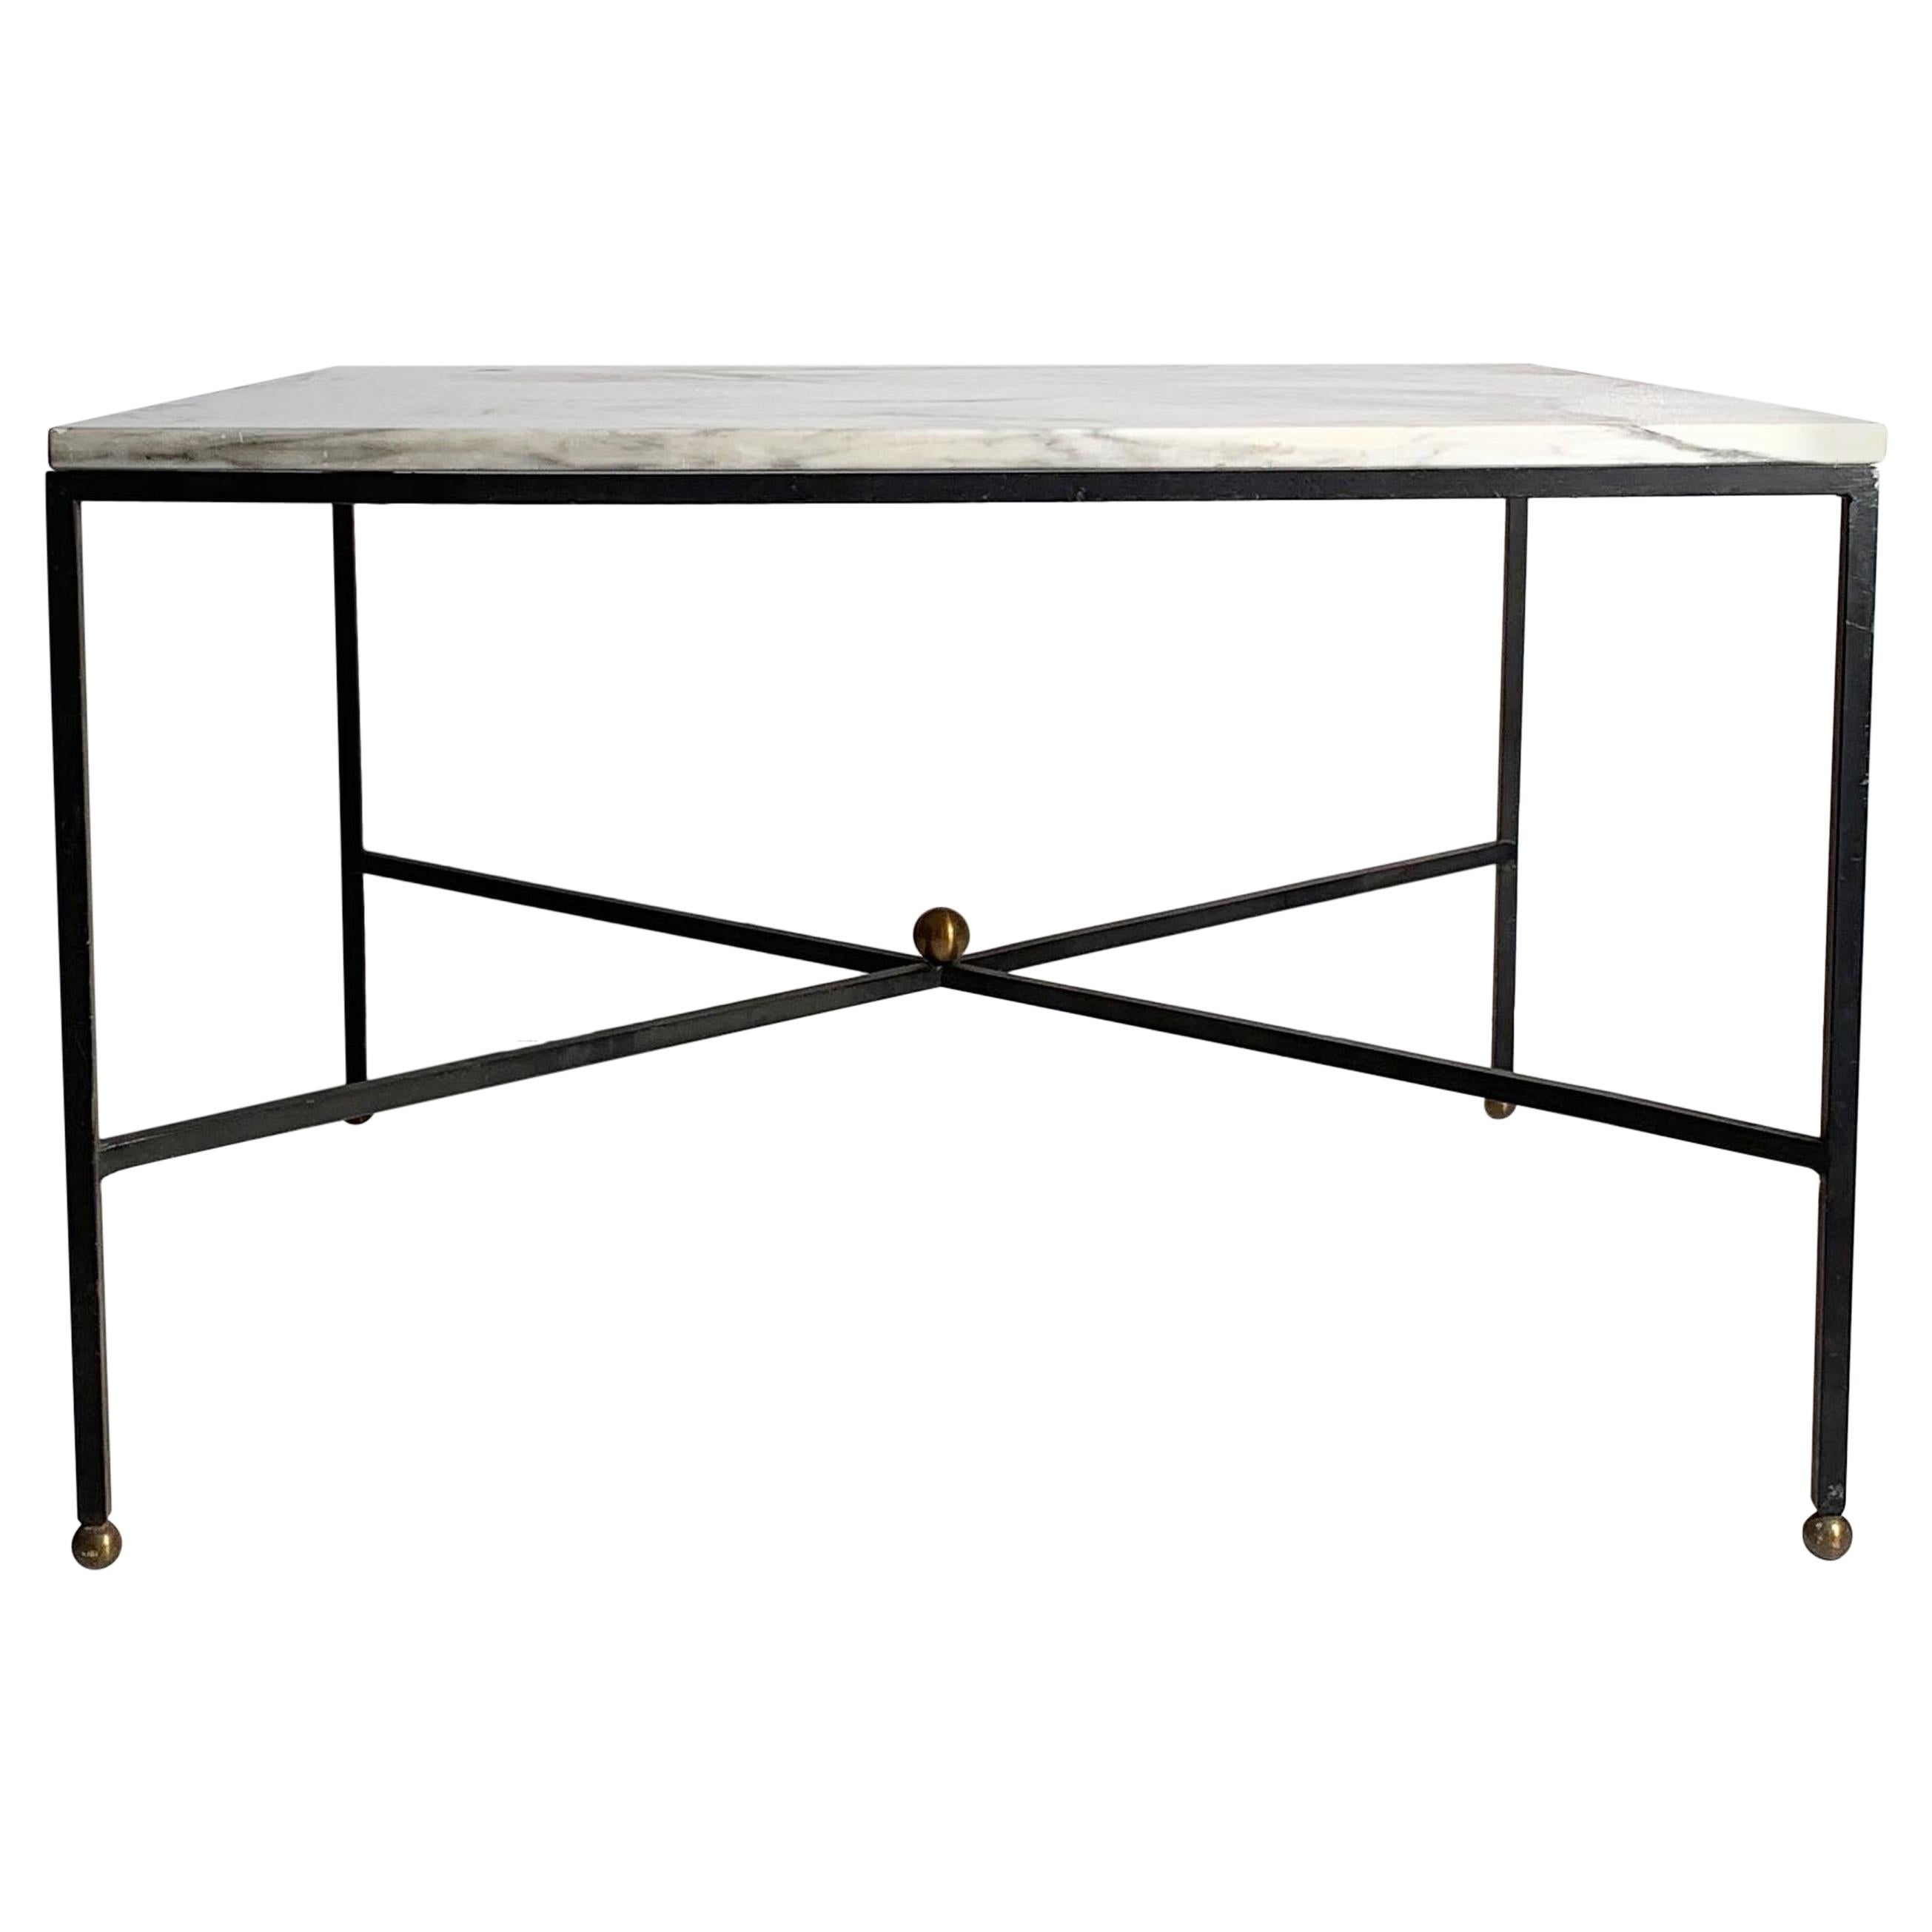 Elegance Architectural Modern Mid-Century Modern Italian Iron and Marble Coffee Table (table basse en fer et marbre)